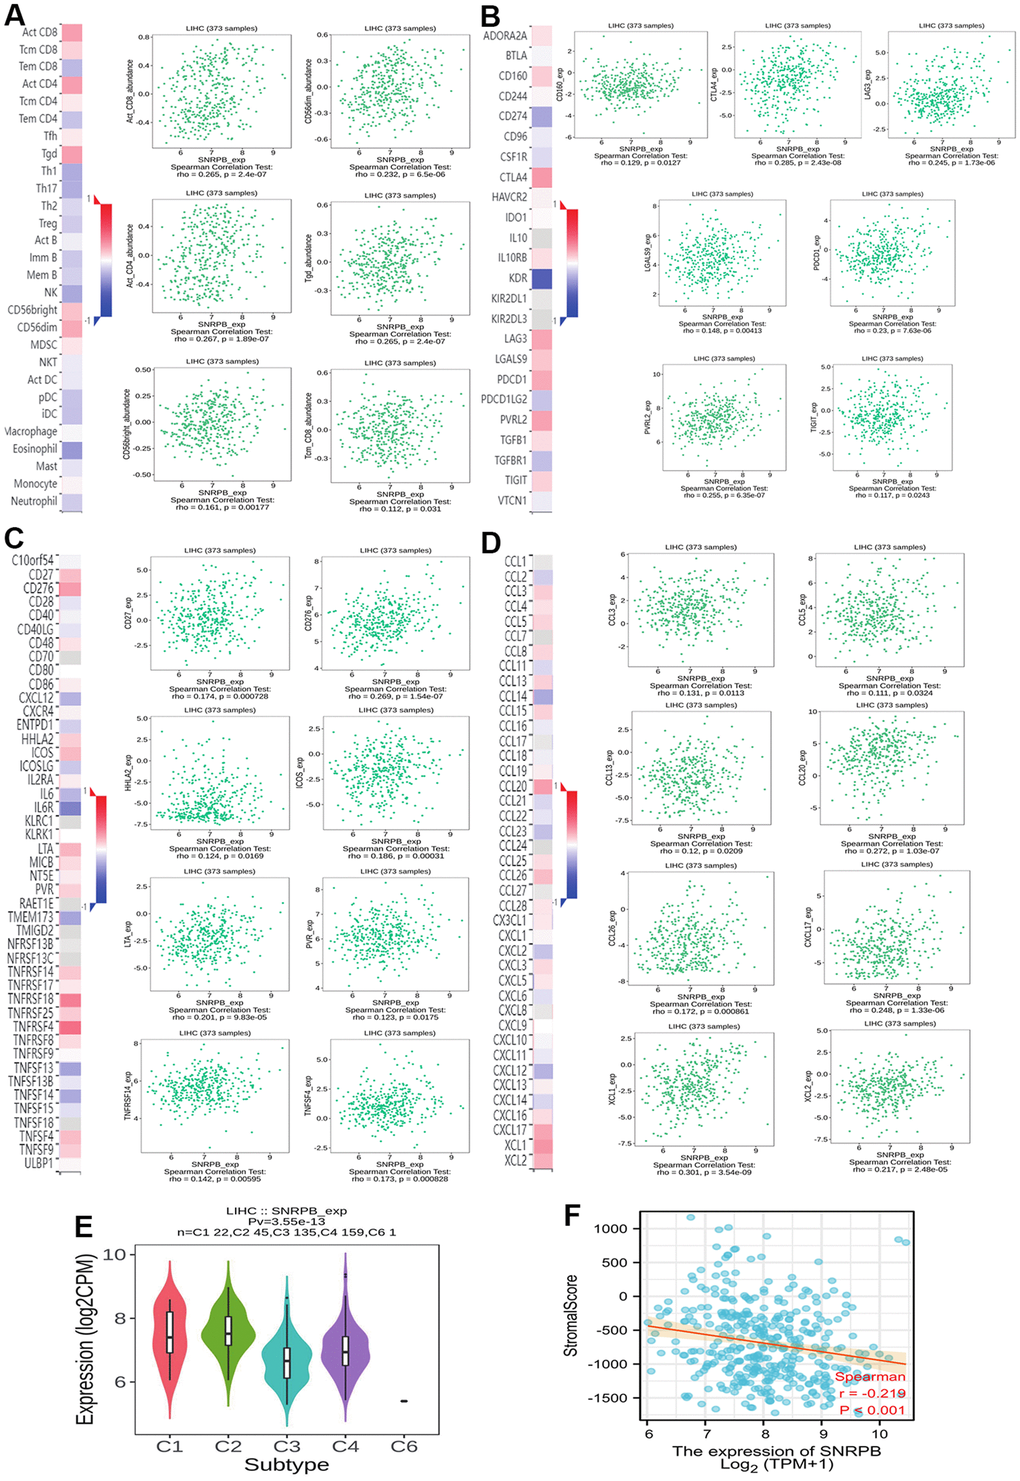 Correlation between SNRPB and immune cell infiltration in HCC. (A) Correlation between SNRPB expression and immunity cells. (B) Correlation between SNRPB expression and checkpoints. (C) Correlation between SNRPB expression and immune inhibitors. (D) Correlation between SNRPB expression and chemokines. (E) SNRPB expression in different HCC immune subtypes. (C1 (wound healing), C2 (IFN-gamma dominant), C3 (inflammatory), and C4 (lymphocyte depleted)). (F) Correlation between SNRPB expression and immune stroma score.